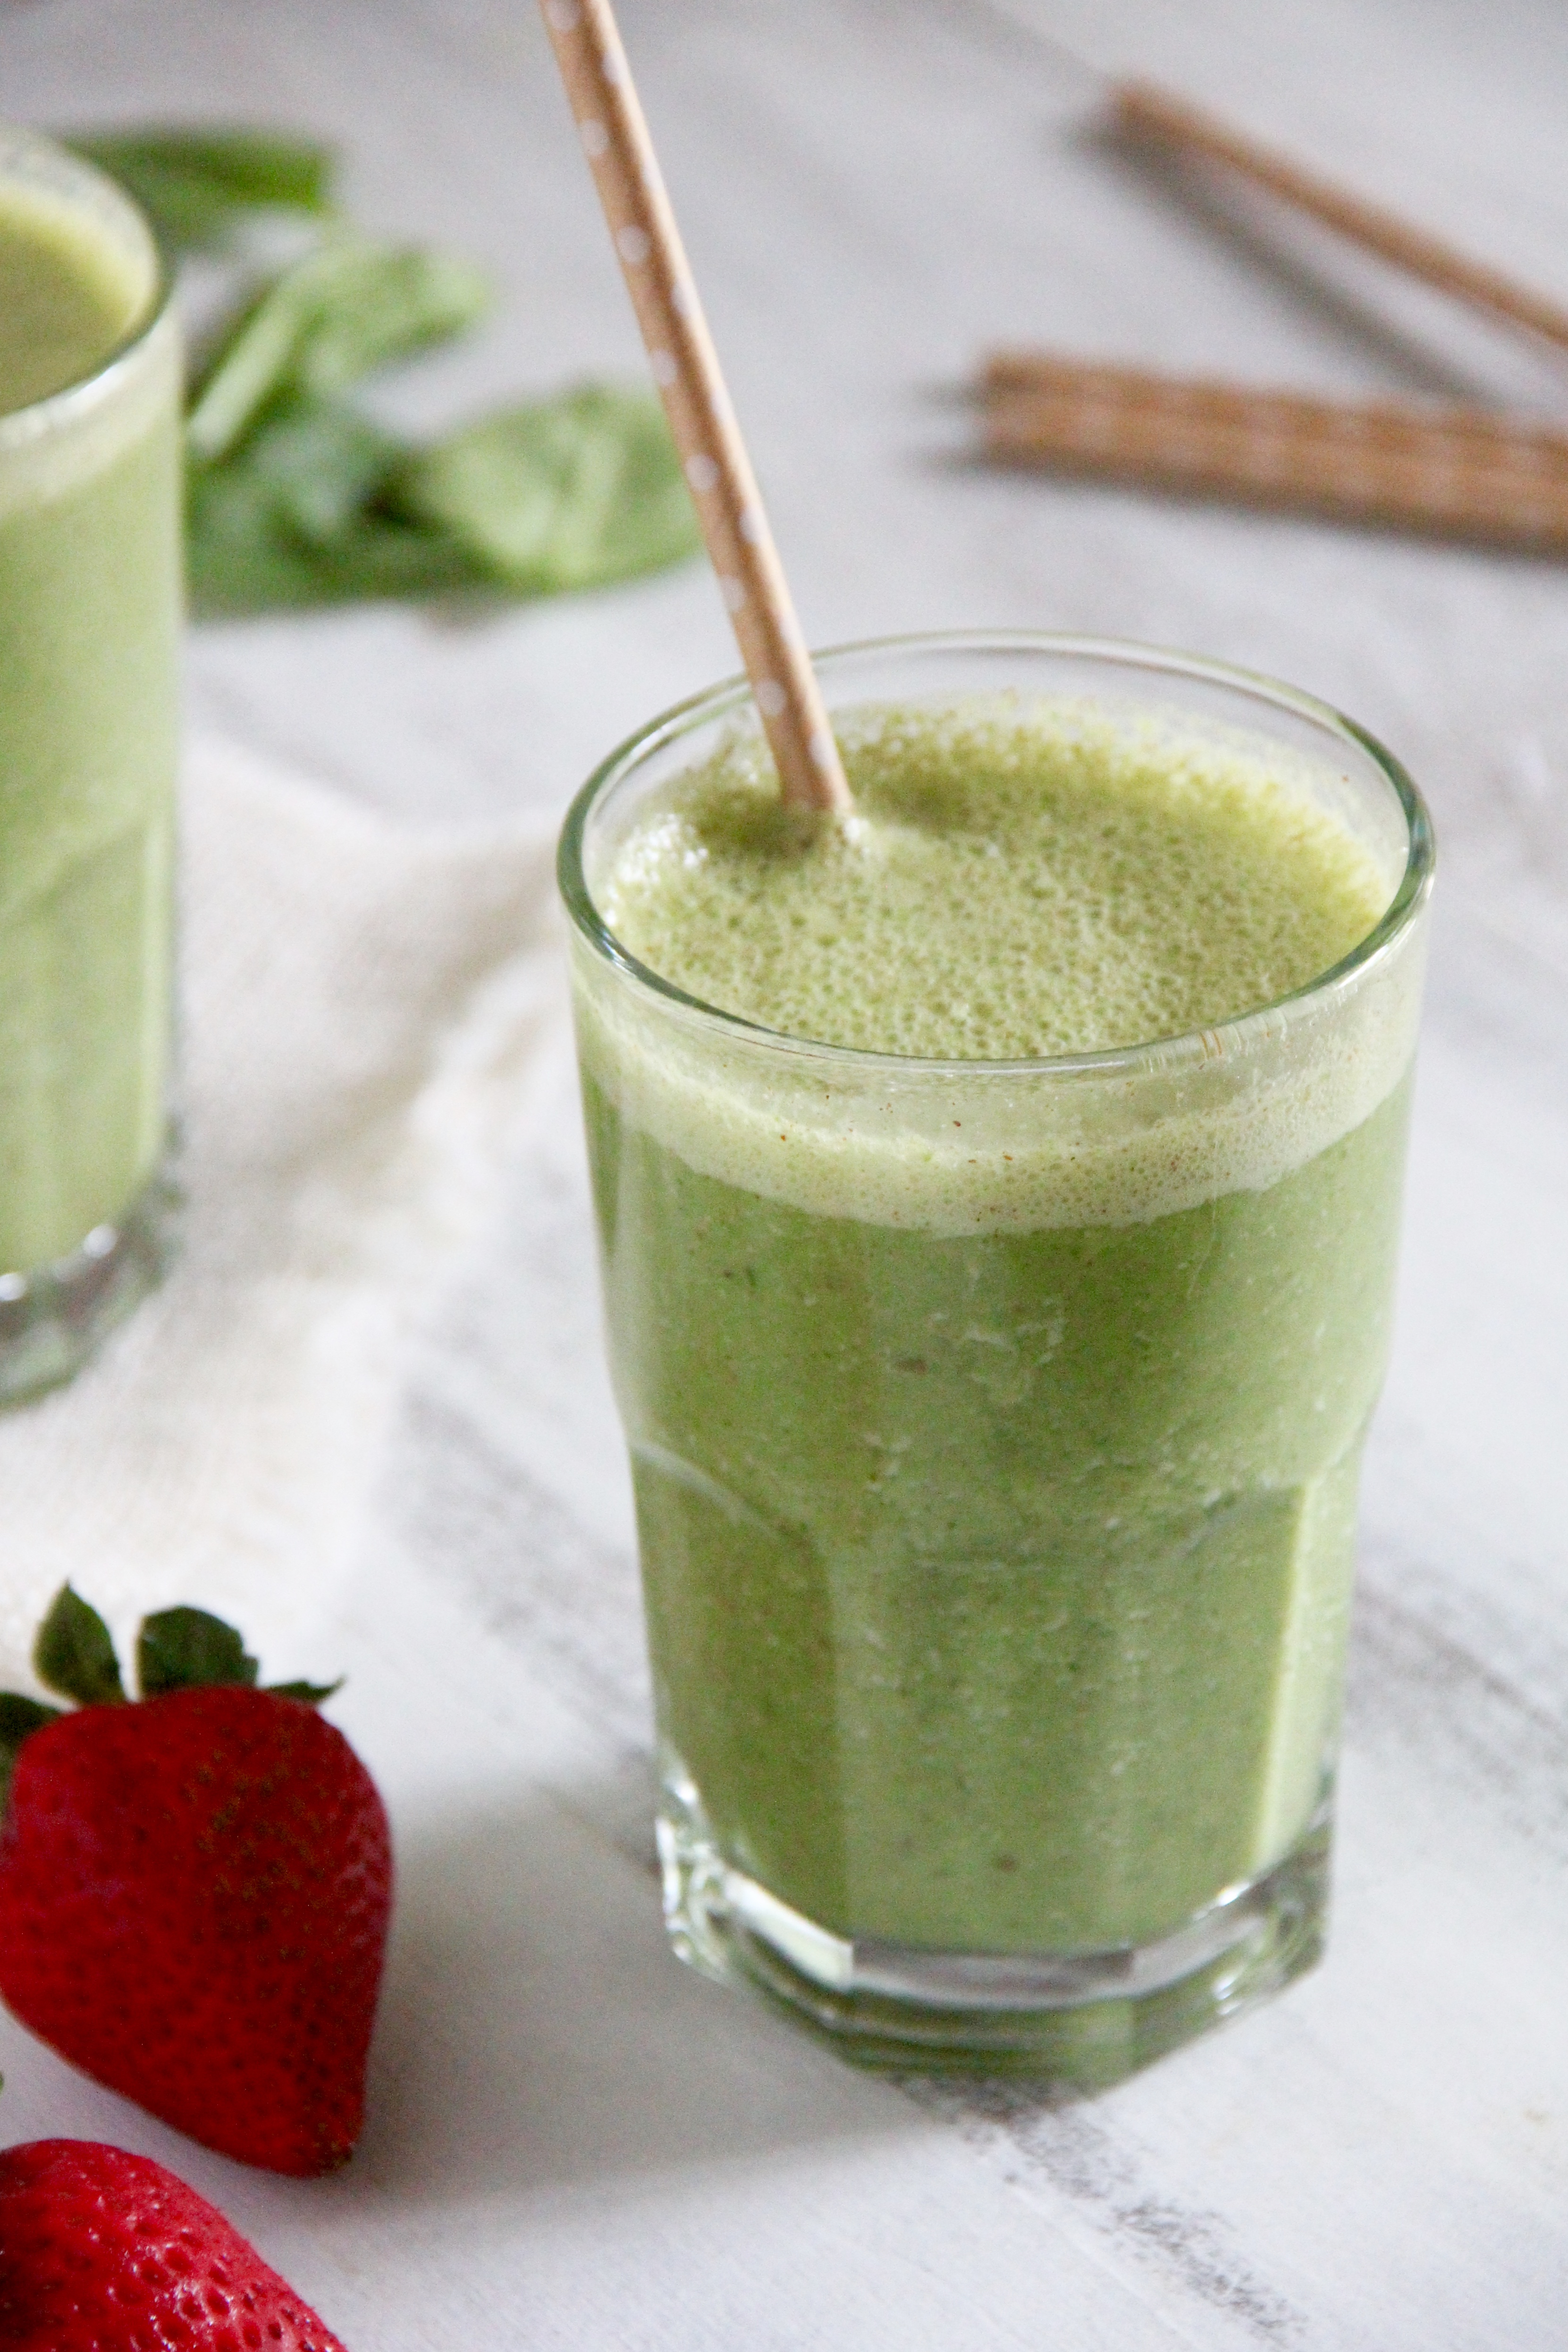 Spinach Almond Butter Smoothie